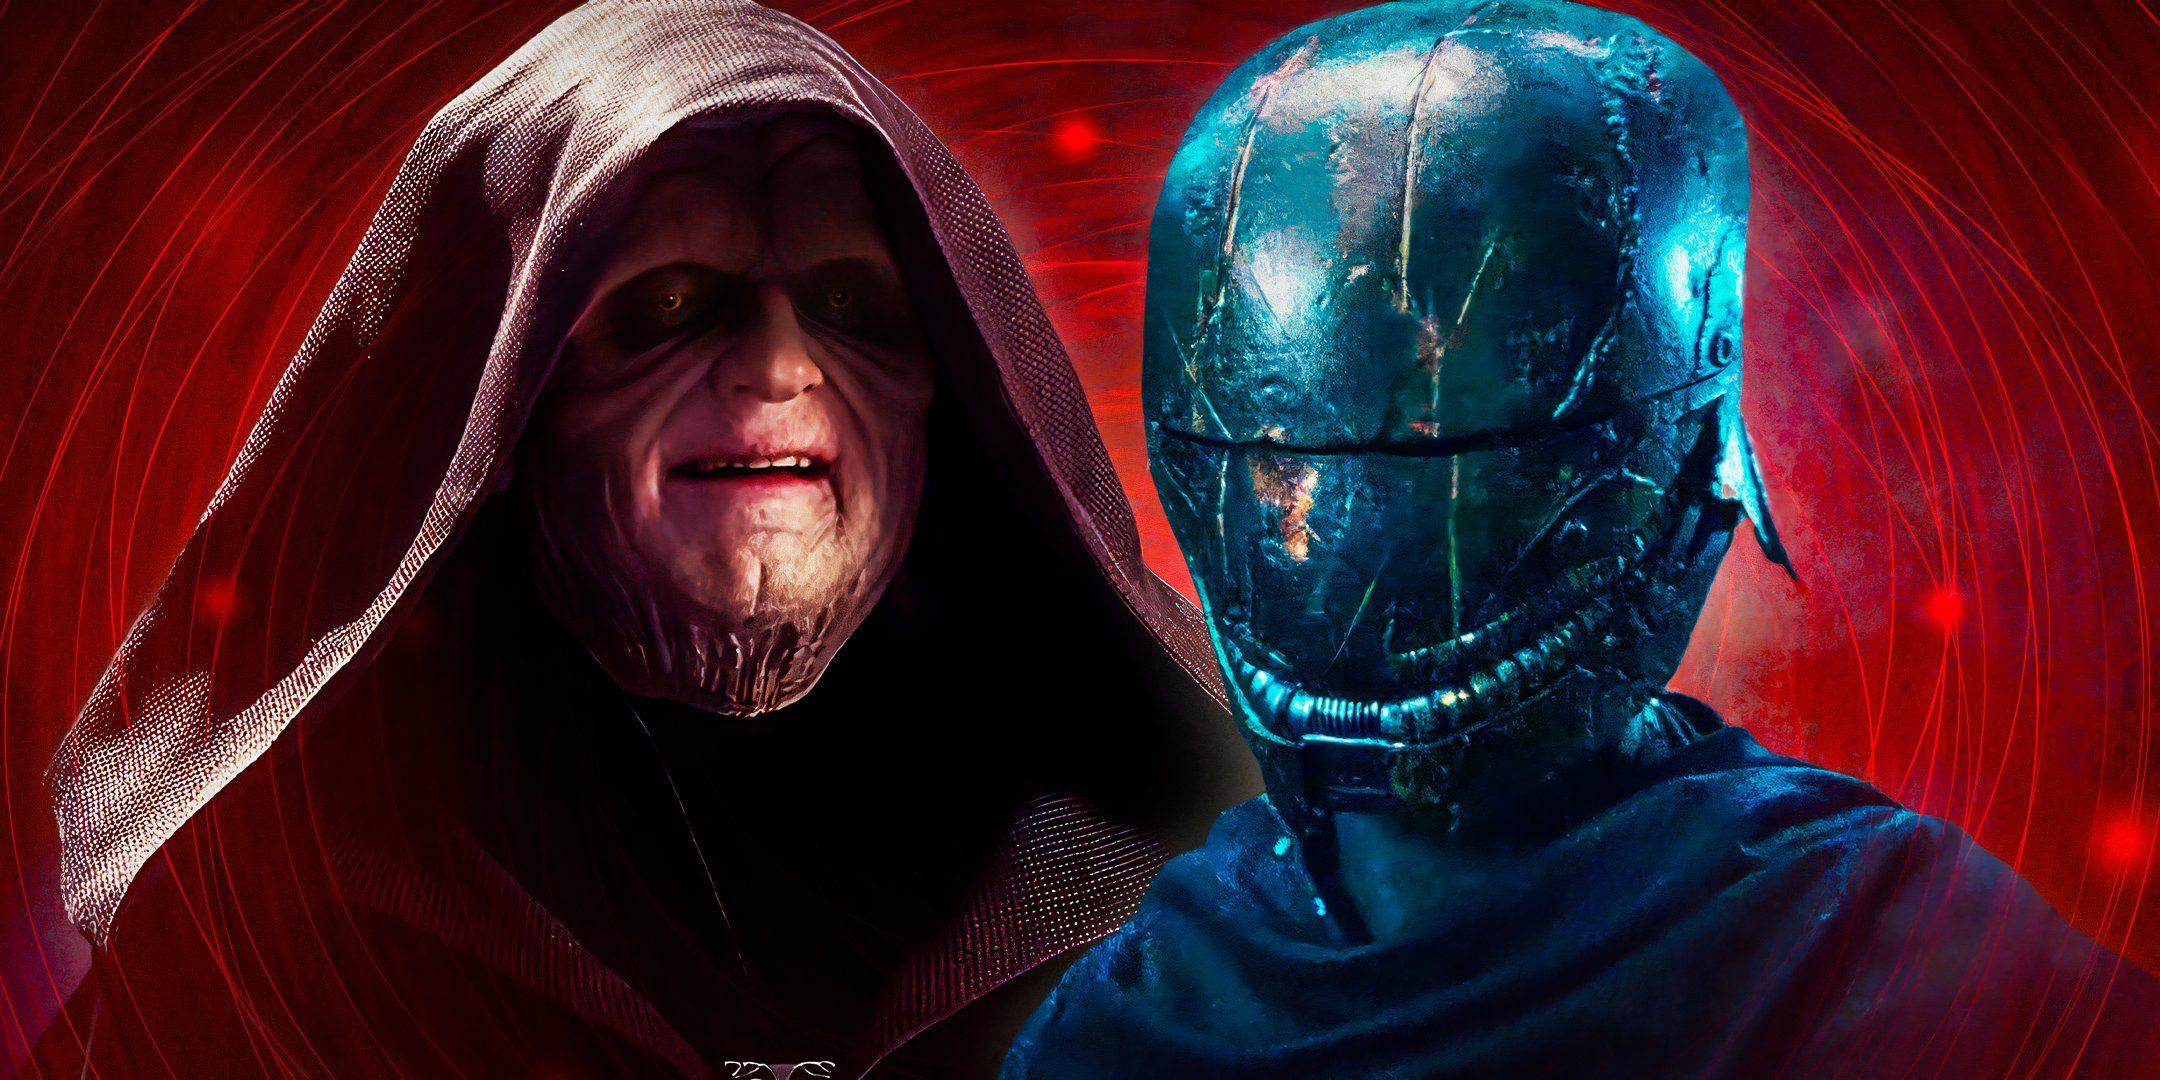 Ian McDiarmid's cloaked Palpatine edited with Manny Jacinto's The Stranger in Star Wars